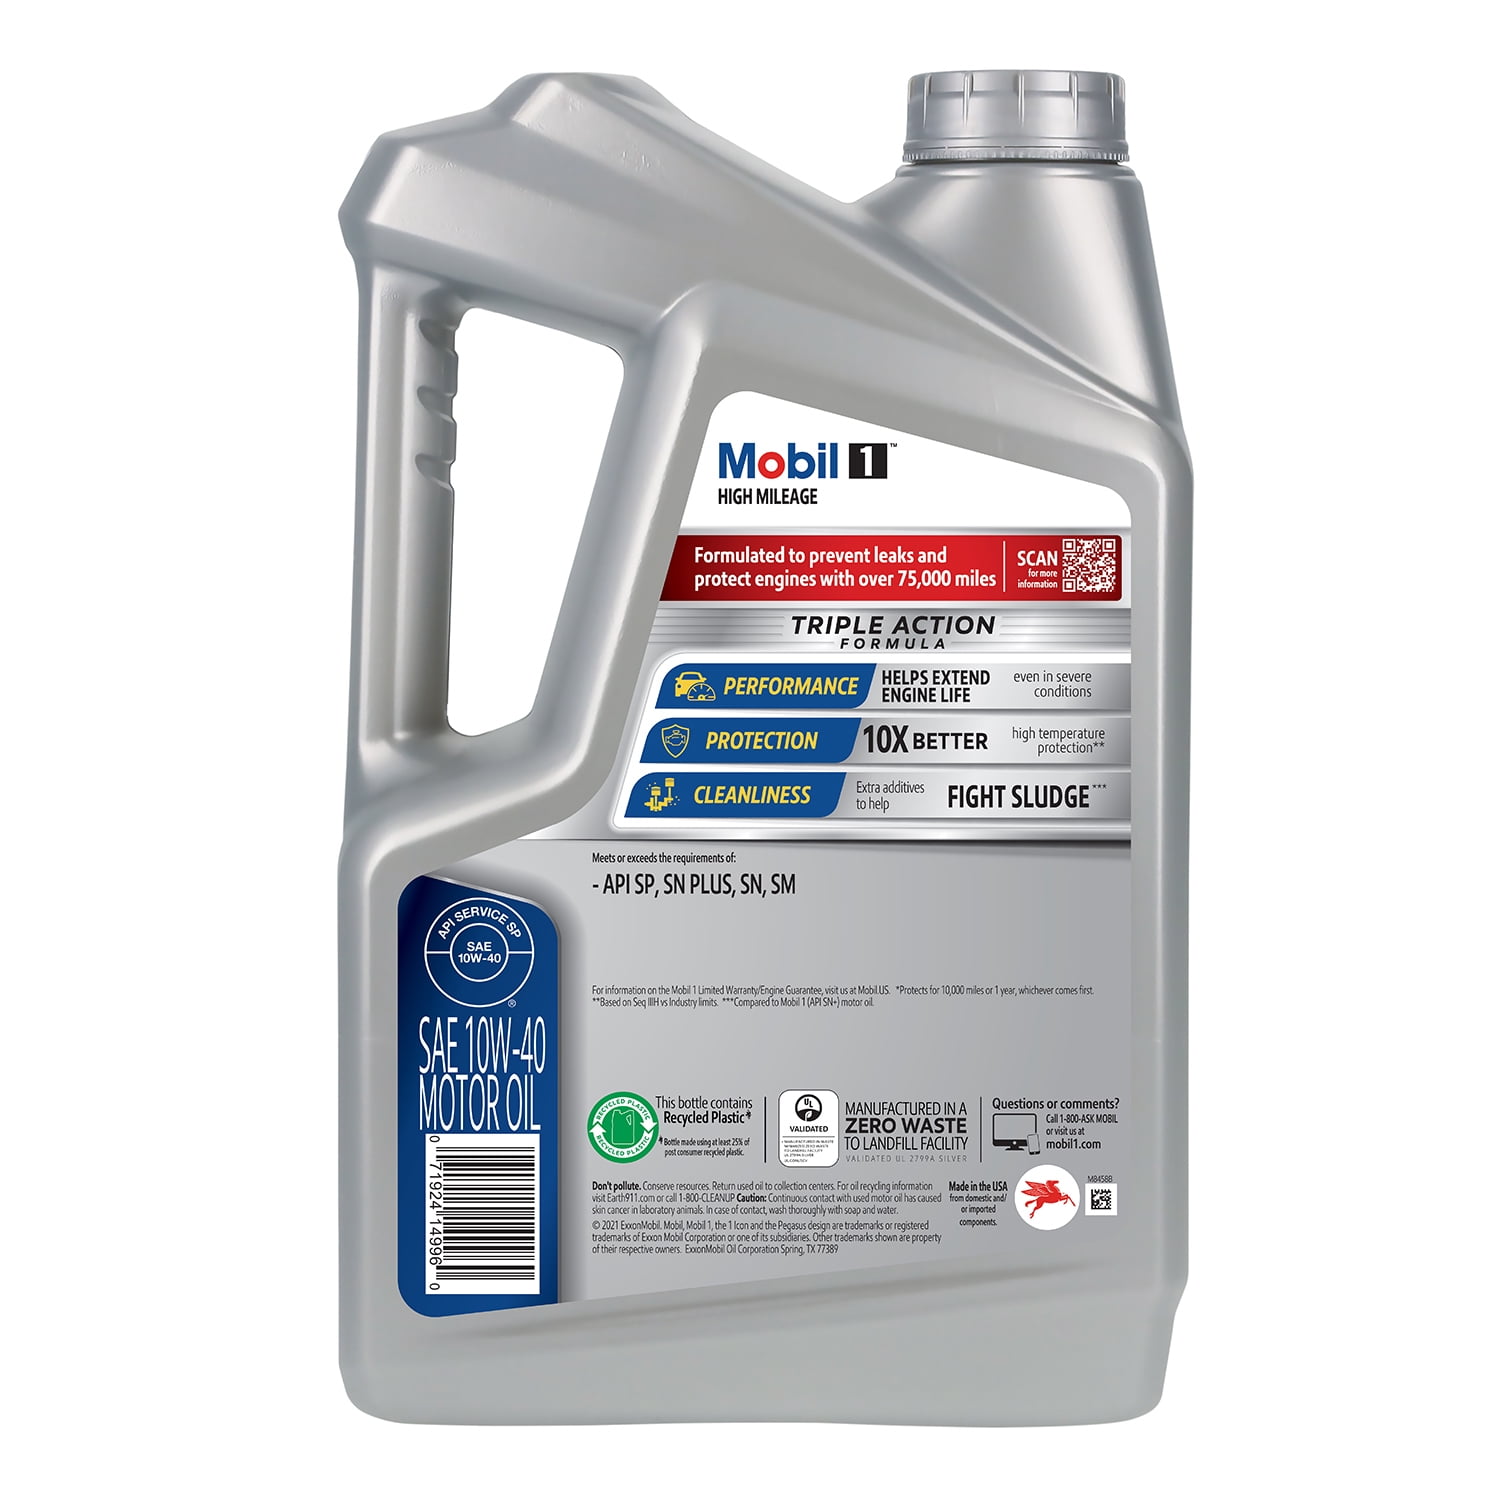 Mobil 1 High Mileage Full Synthetic Motor Oil 10W-40, 5 qt (3 Pack) - 3